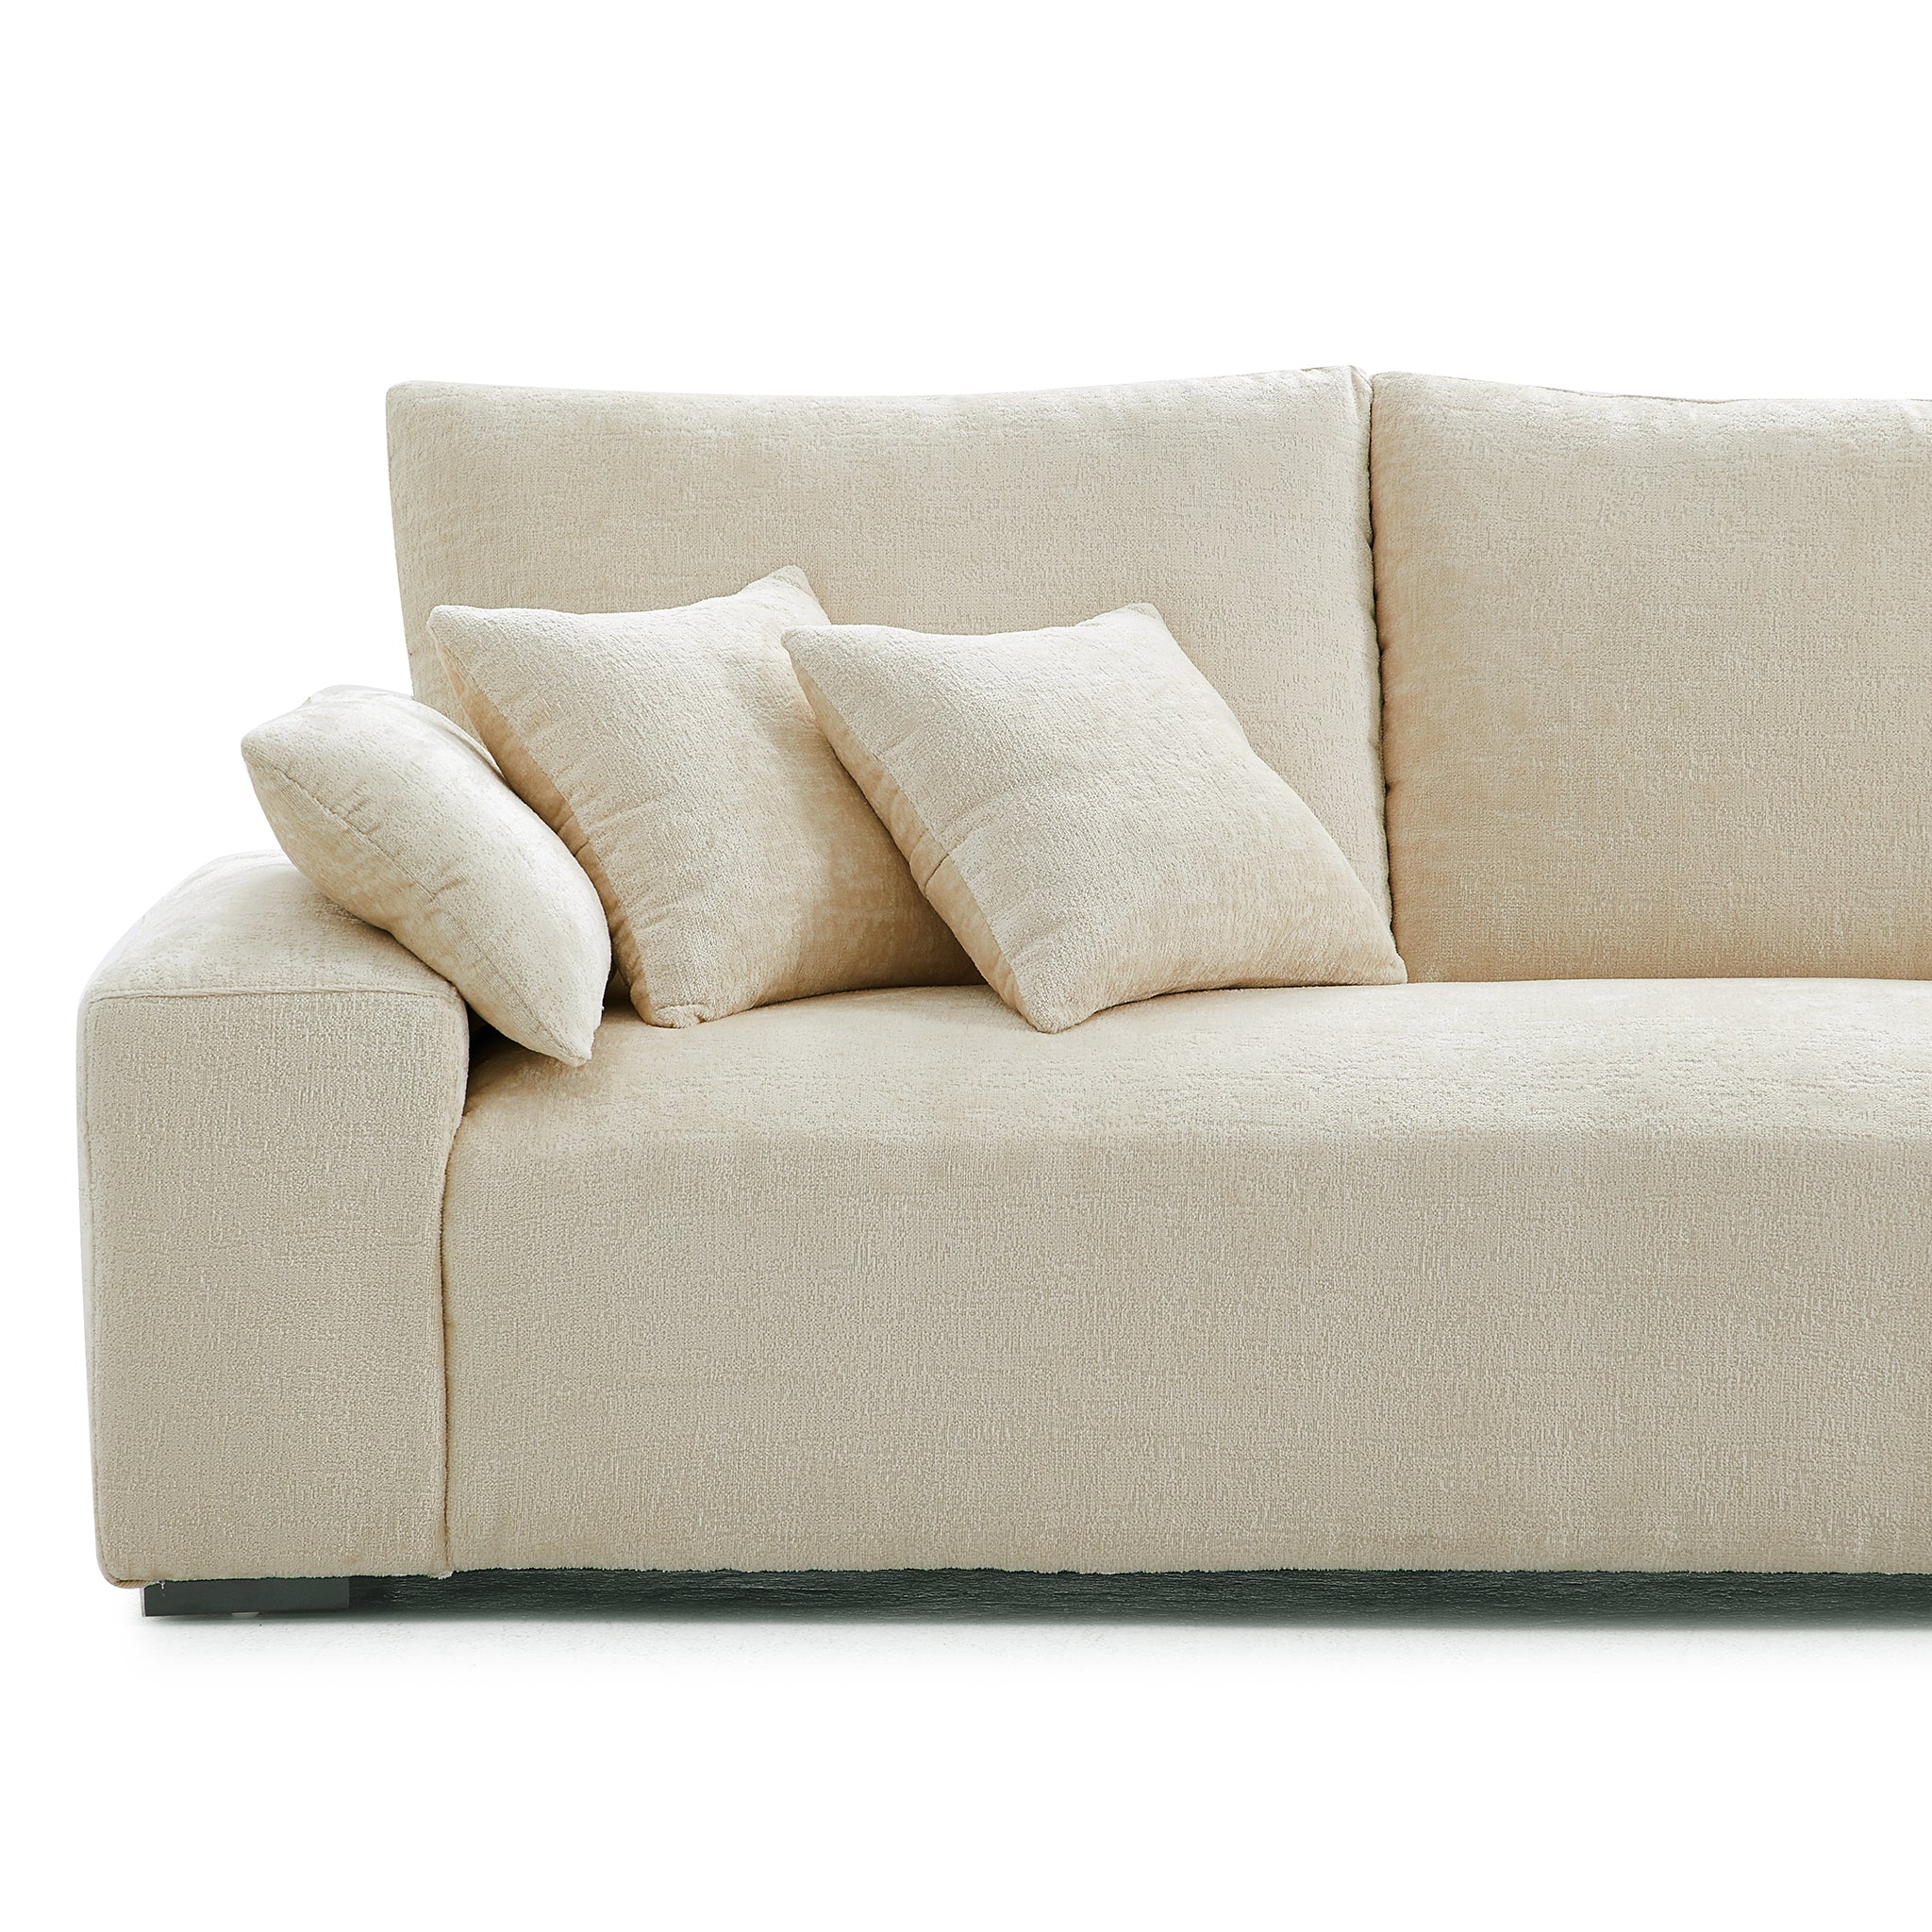 The Empress Beige Sofa and Ottoman